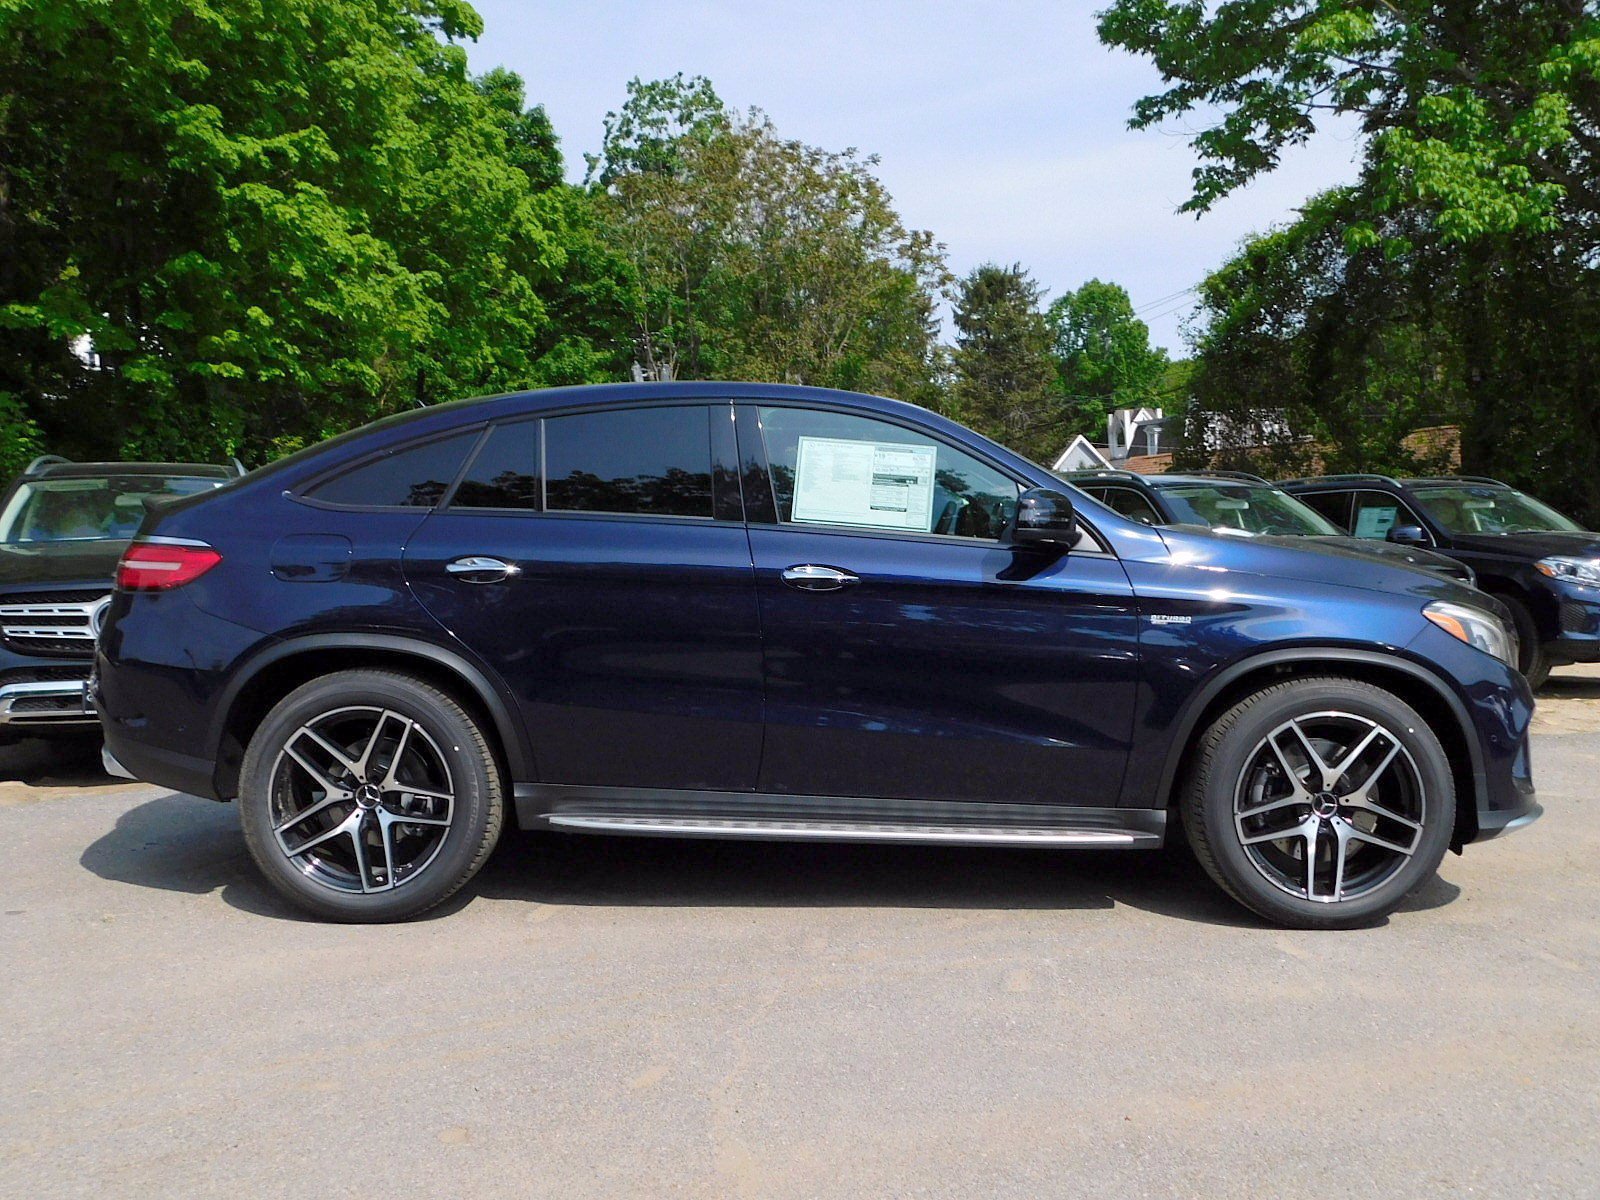 New 2019 Mercedes Benz Amg Gle 43 Coupe Awd 4matic